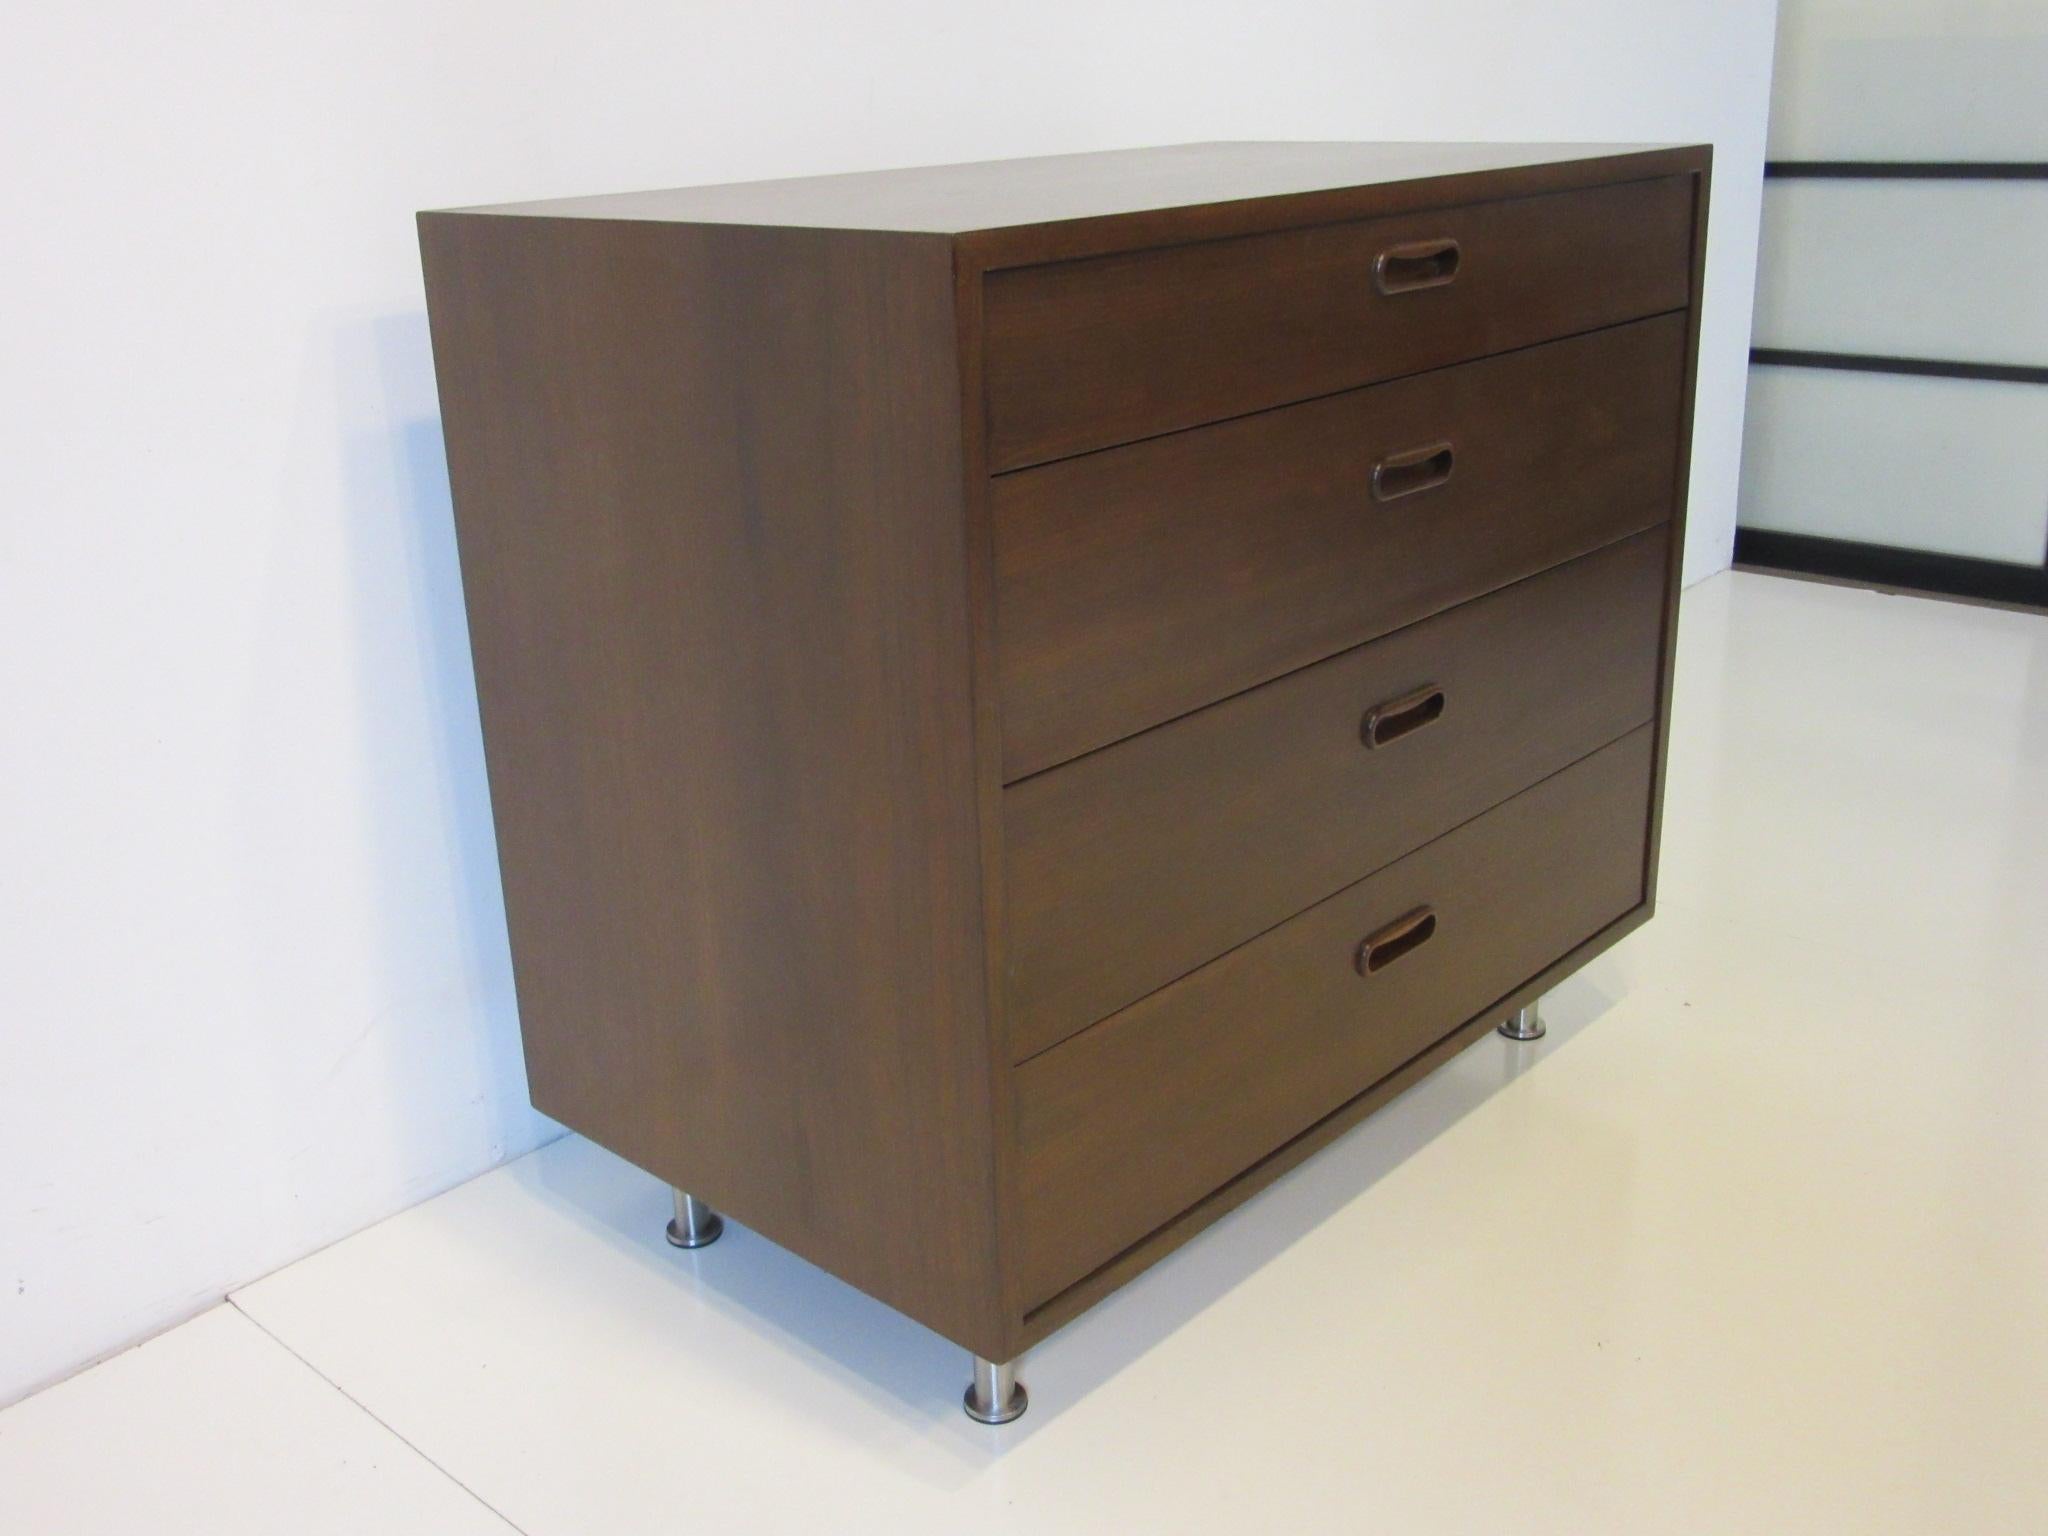 A dark walnut smaller sized four-drawer dresser chest with matching pulls sitting on brushed stainless steel adjustable legs, the backside is finished in the same walnut designed by Poul Cadovius for Cado with replaced legs.